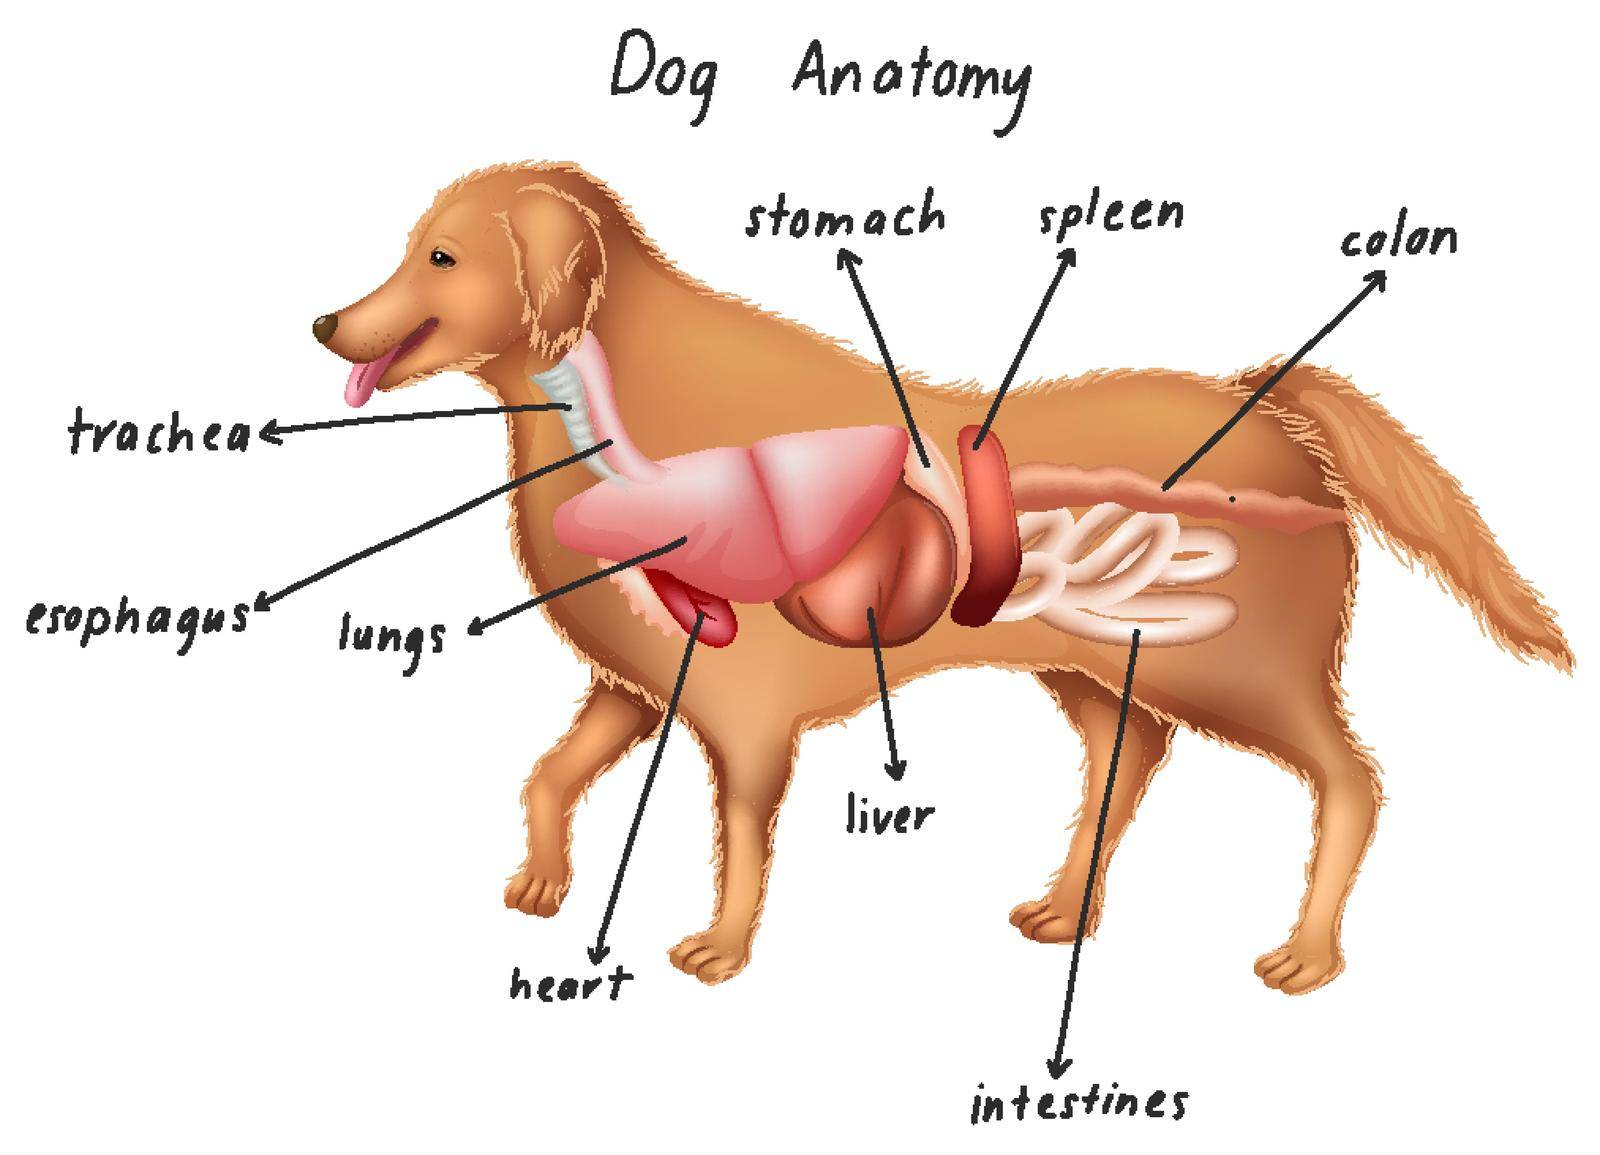 Anatomy of a dog by iimages